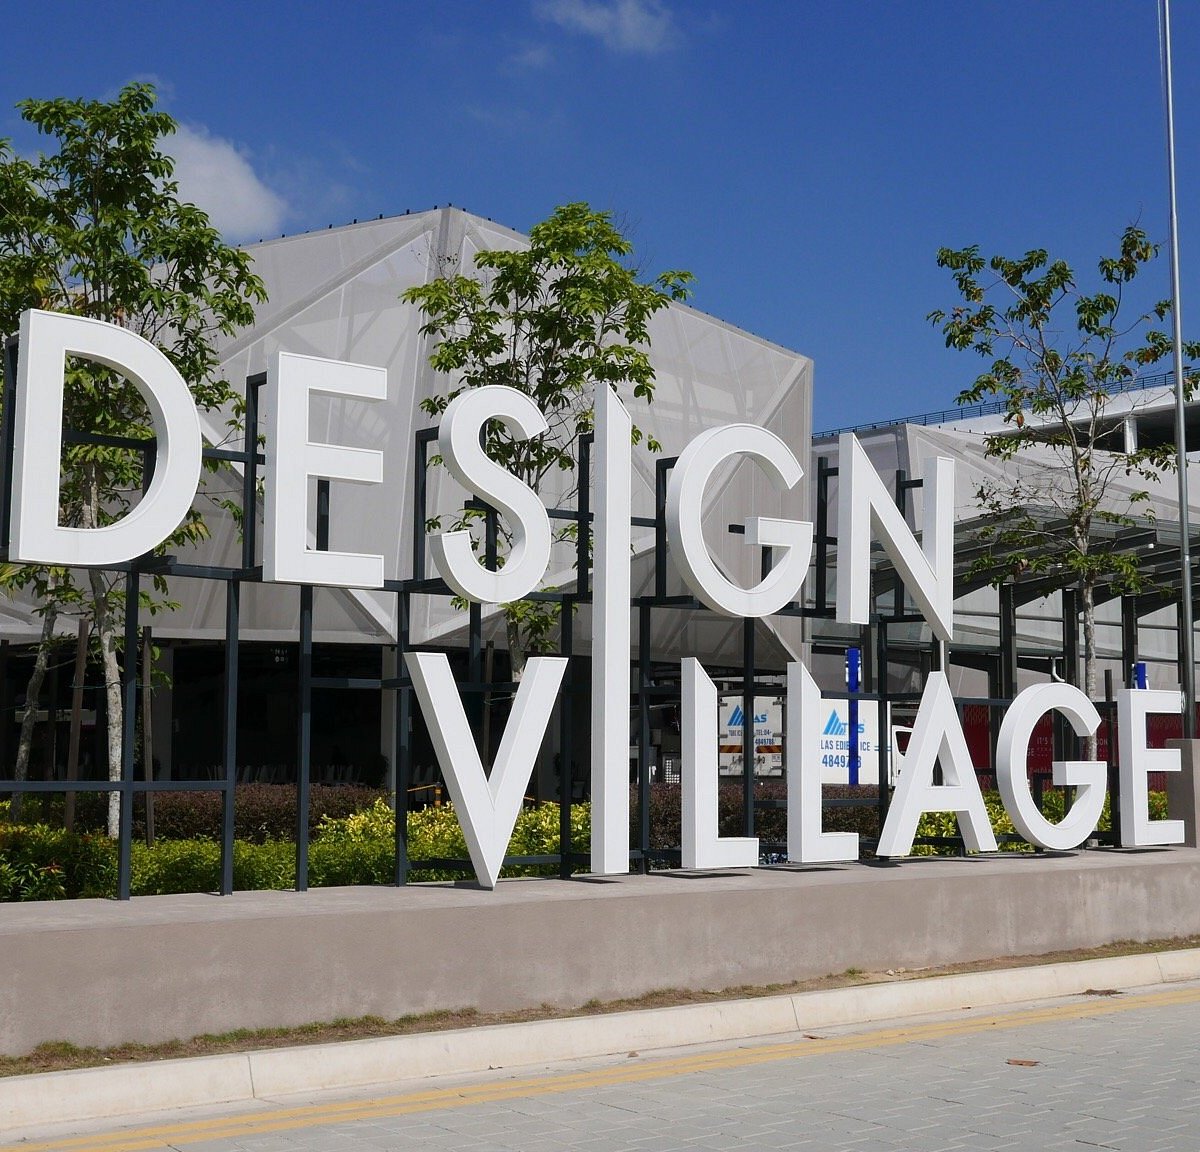 Head down to our Design Village outlet located in Penang ! Spend the  weekend with us 🎊🎉